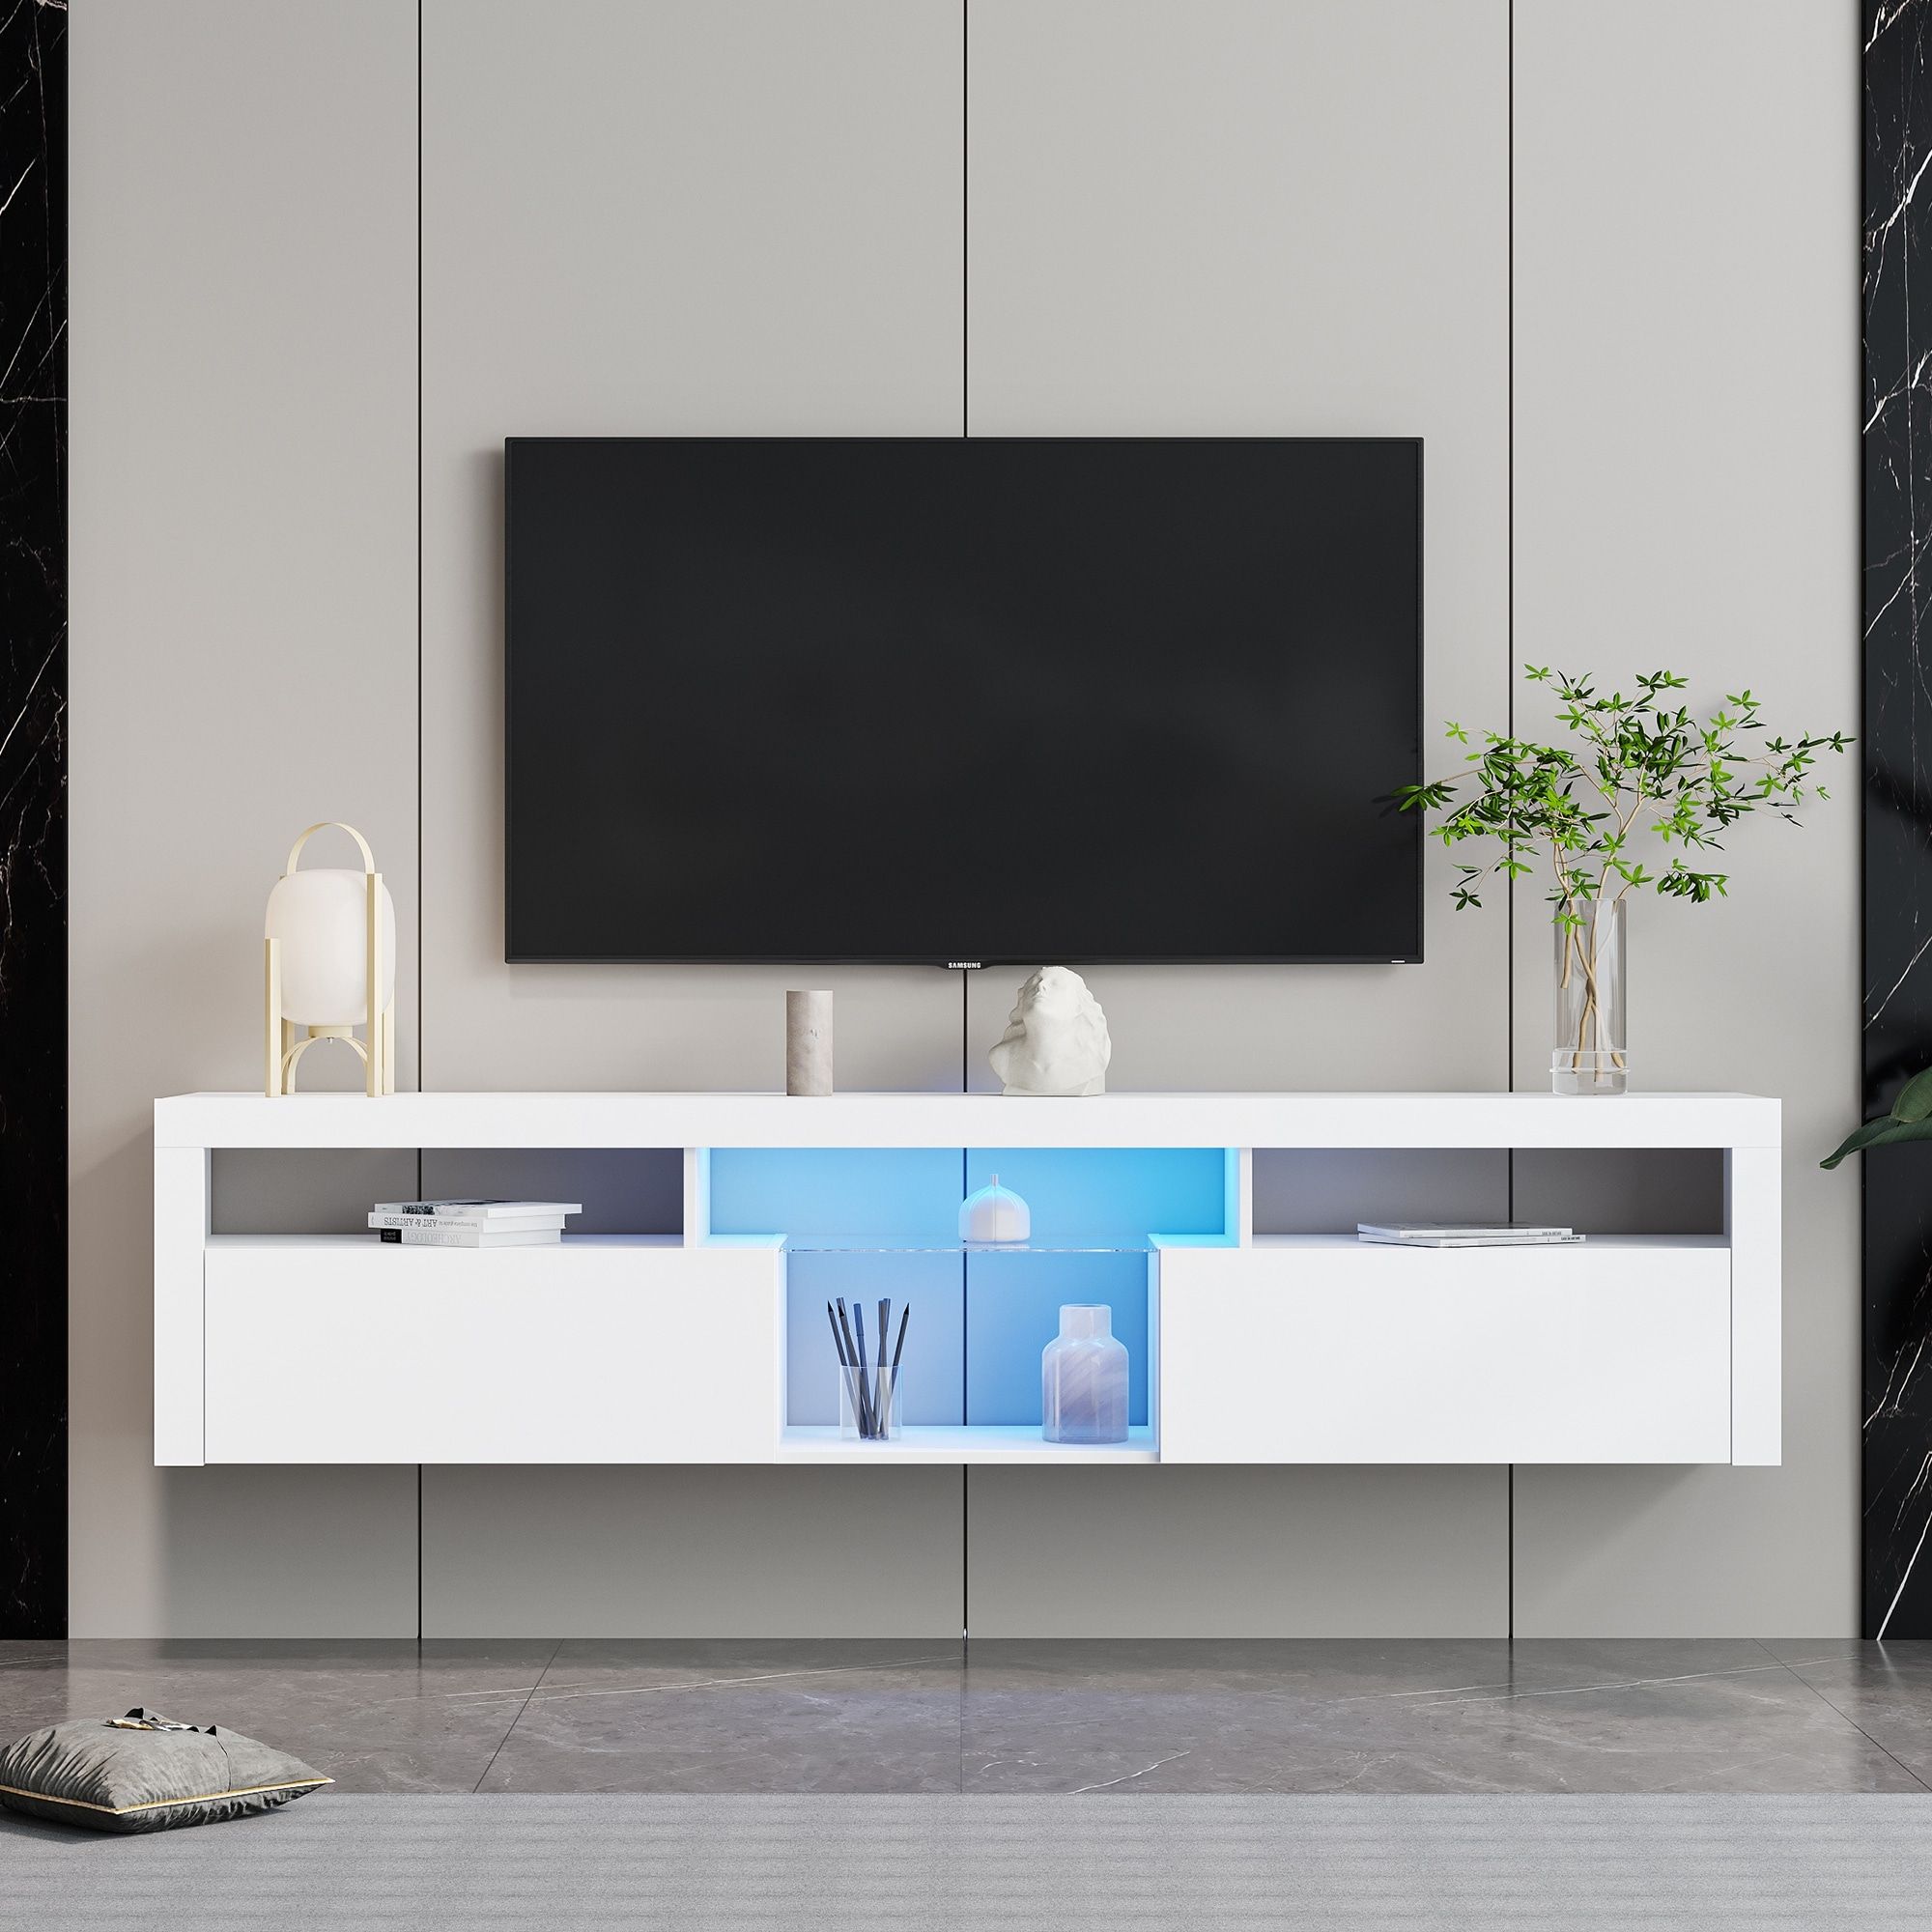 78''l Modern Floating&floor Dual Use Tv Stand Cabinet With 2 Storage  Cabinet&open Shelf For Living Room Bedroom, Max 70 Inch – Bed Bath & Beyond  – 37529760 With Regard To Dual Use Storage Cabinet Tv Stands (View 4 of 16)